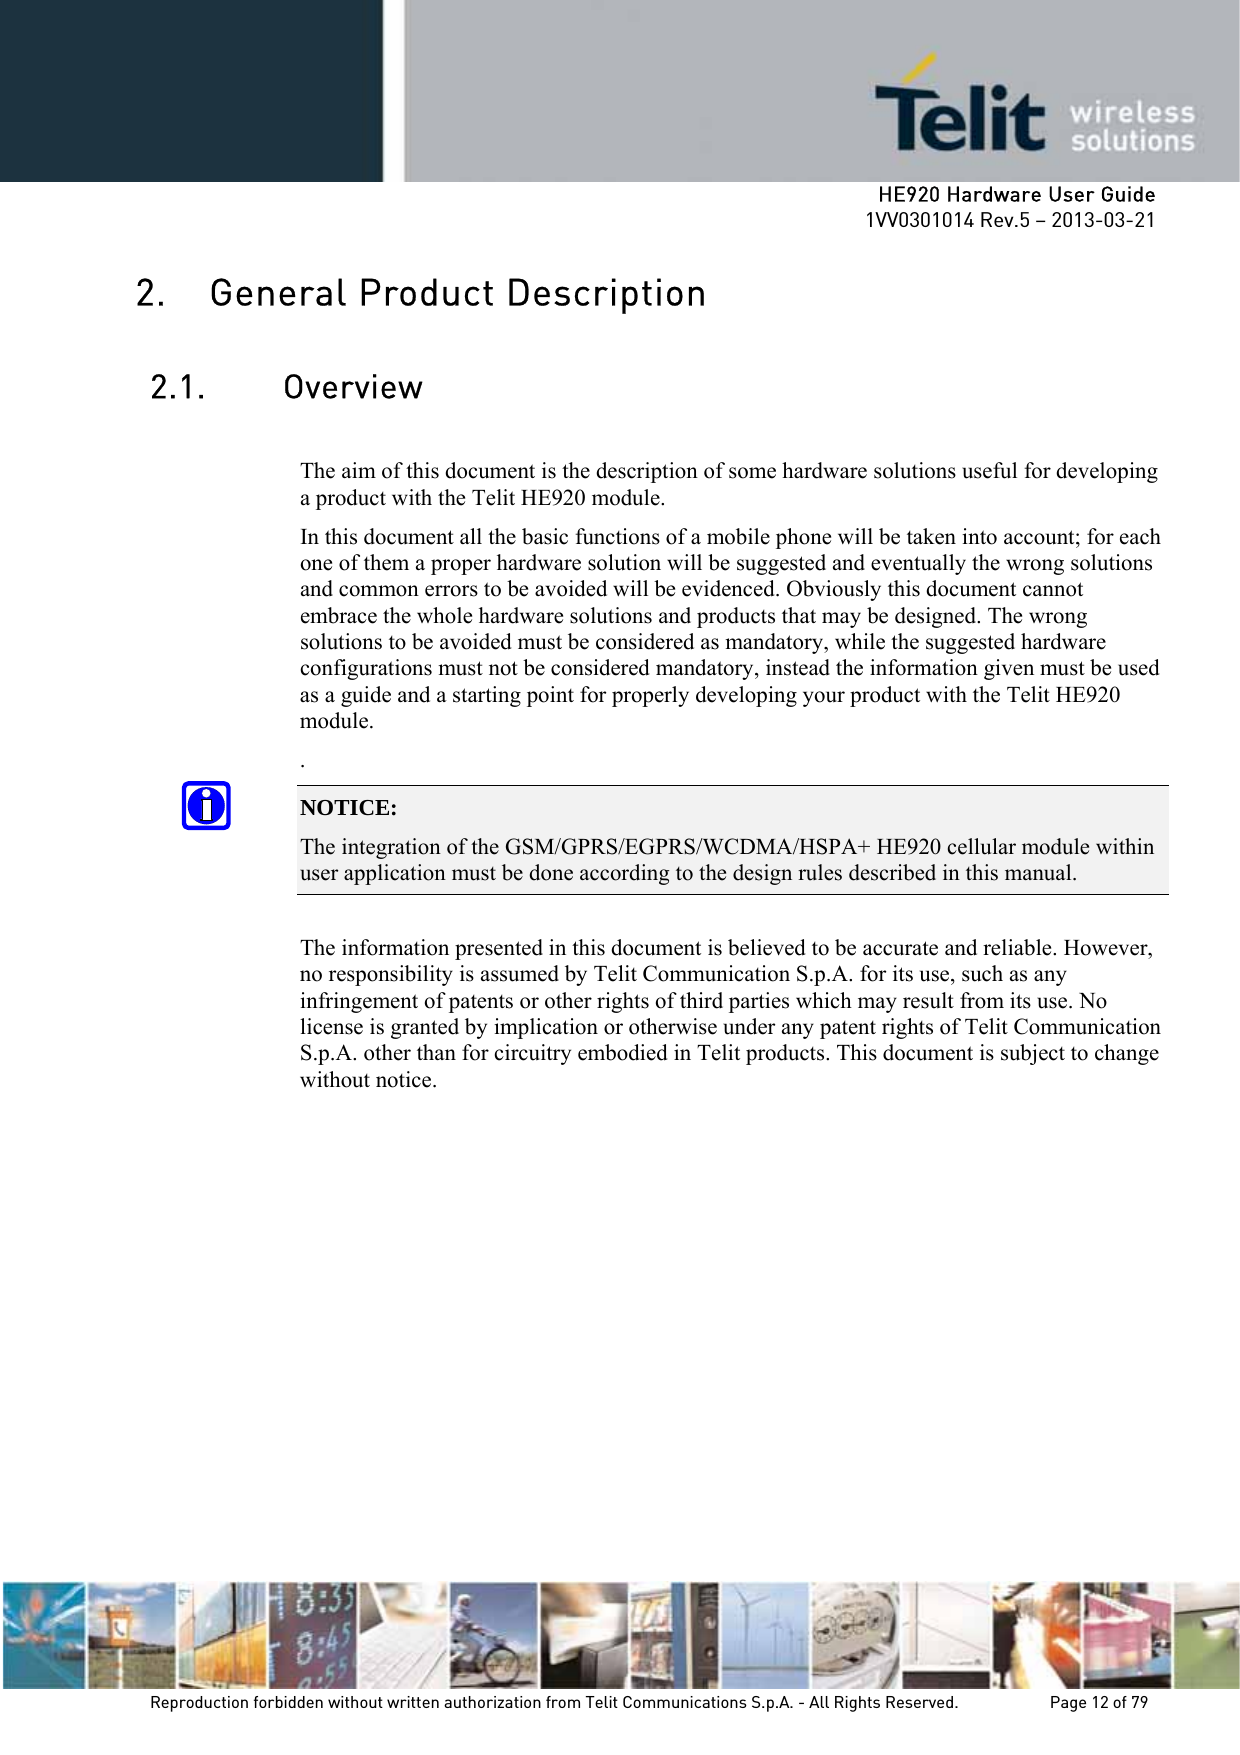     HE920 Hardware User Guide 1VV0301014 Rev.5 – 2013-03-21 Reproduction forbidden without written authorization from Telit Communications S.p.A. - All Rights Reserved.    Page 12 of 79  2. General Product Description 2.1. Overview  The aim of this document is the description of some hardware solutions useful for developing a product with the Telit HE920 module. In this document all the basic functions of a mobile phone will be taken into account; for each one of them a proper hardware solution will be suggested and eventually the wrong solutions and common errors to be avoided will be evidenced. Obviously this document cannot embrace the whole hardware solutions and products that may be designed. The wrong solutions to be avoided must be considered as mandatory, while the suggested hardware configurations must not be considered mandatory, instead the information given must be used as a guide and a starting point for properly developing your product with the Telit HE920 module. . NOTICE: The integration of the GSM/GPRS/EGPRS/WCDMA/HSPA+ HE920 cellular module within user application must be done according to the design rules described in this manual.    The information presented in this document is believed to be accurate and reliable. However, no responsibility is assumed by Telit Communication S.p.A. for its use, such as any infringement of patents or other rights of third parties which may result from its use. No license is granted by implication or otherwise under any patent rights of Telit Communication S.p.A. other than for circuitry embodied in Telit products. This document is subject to change without notice.  